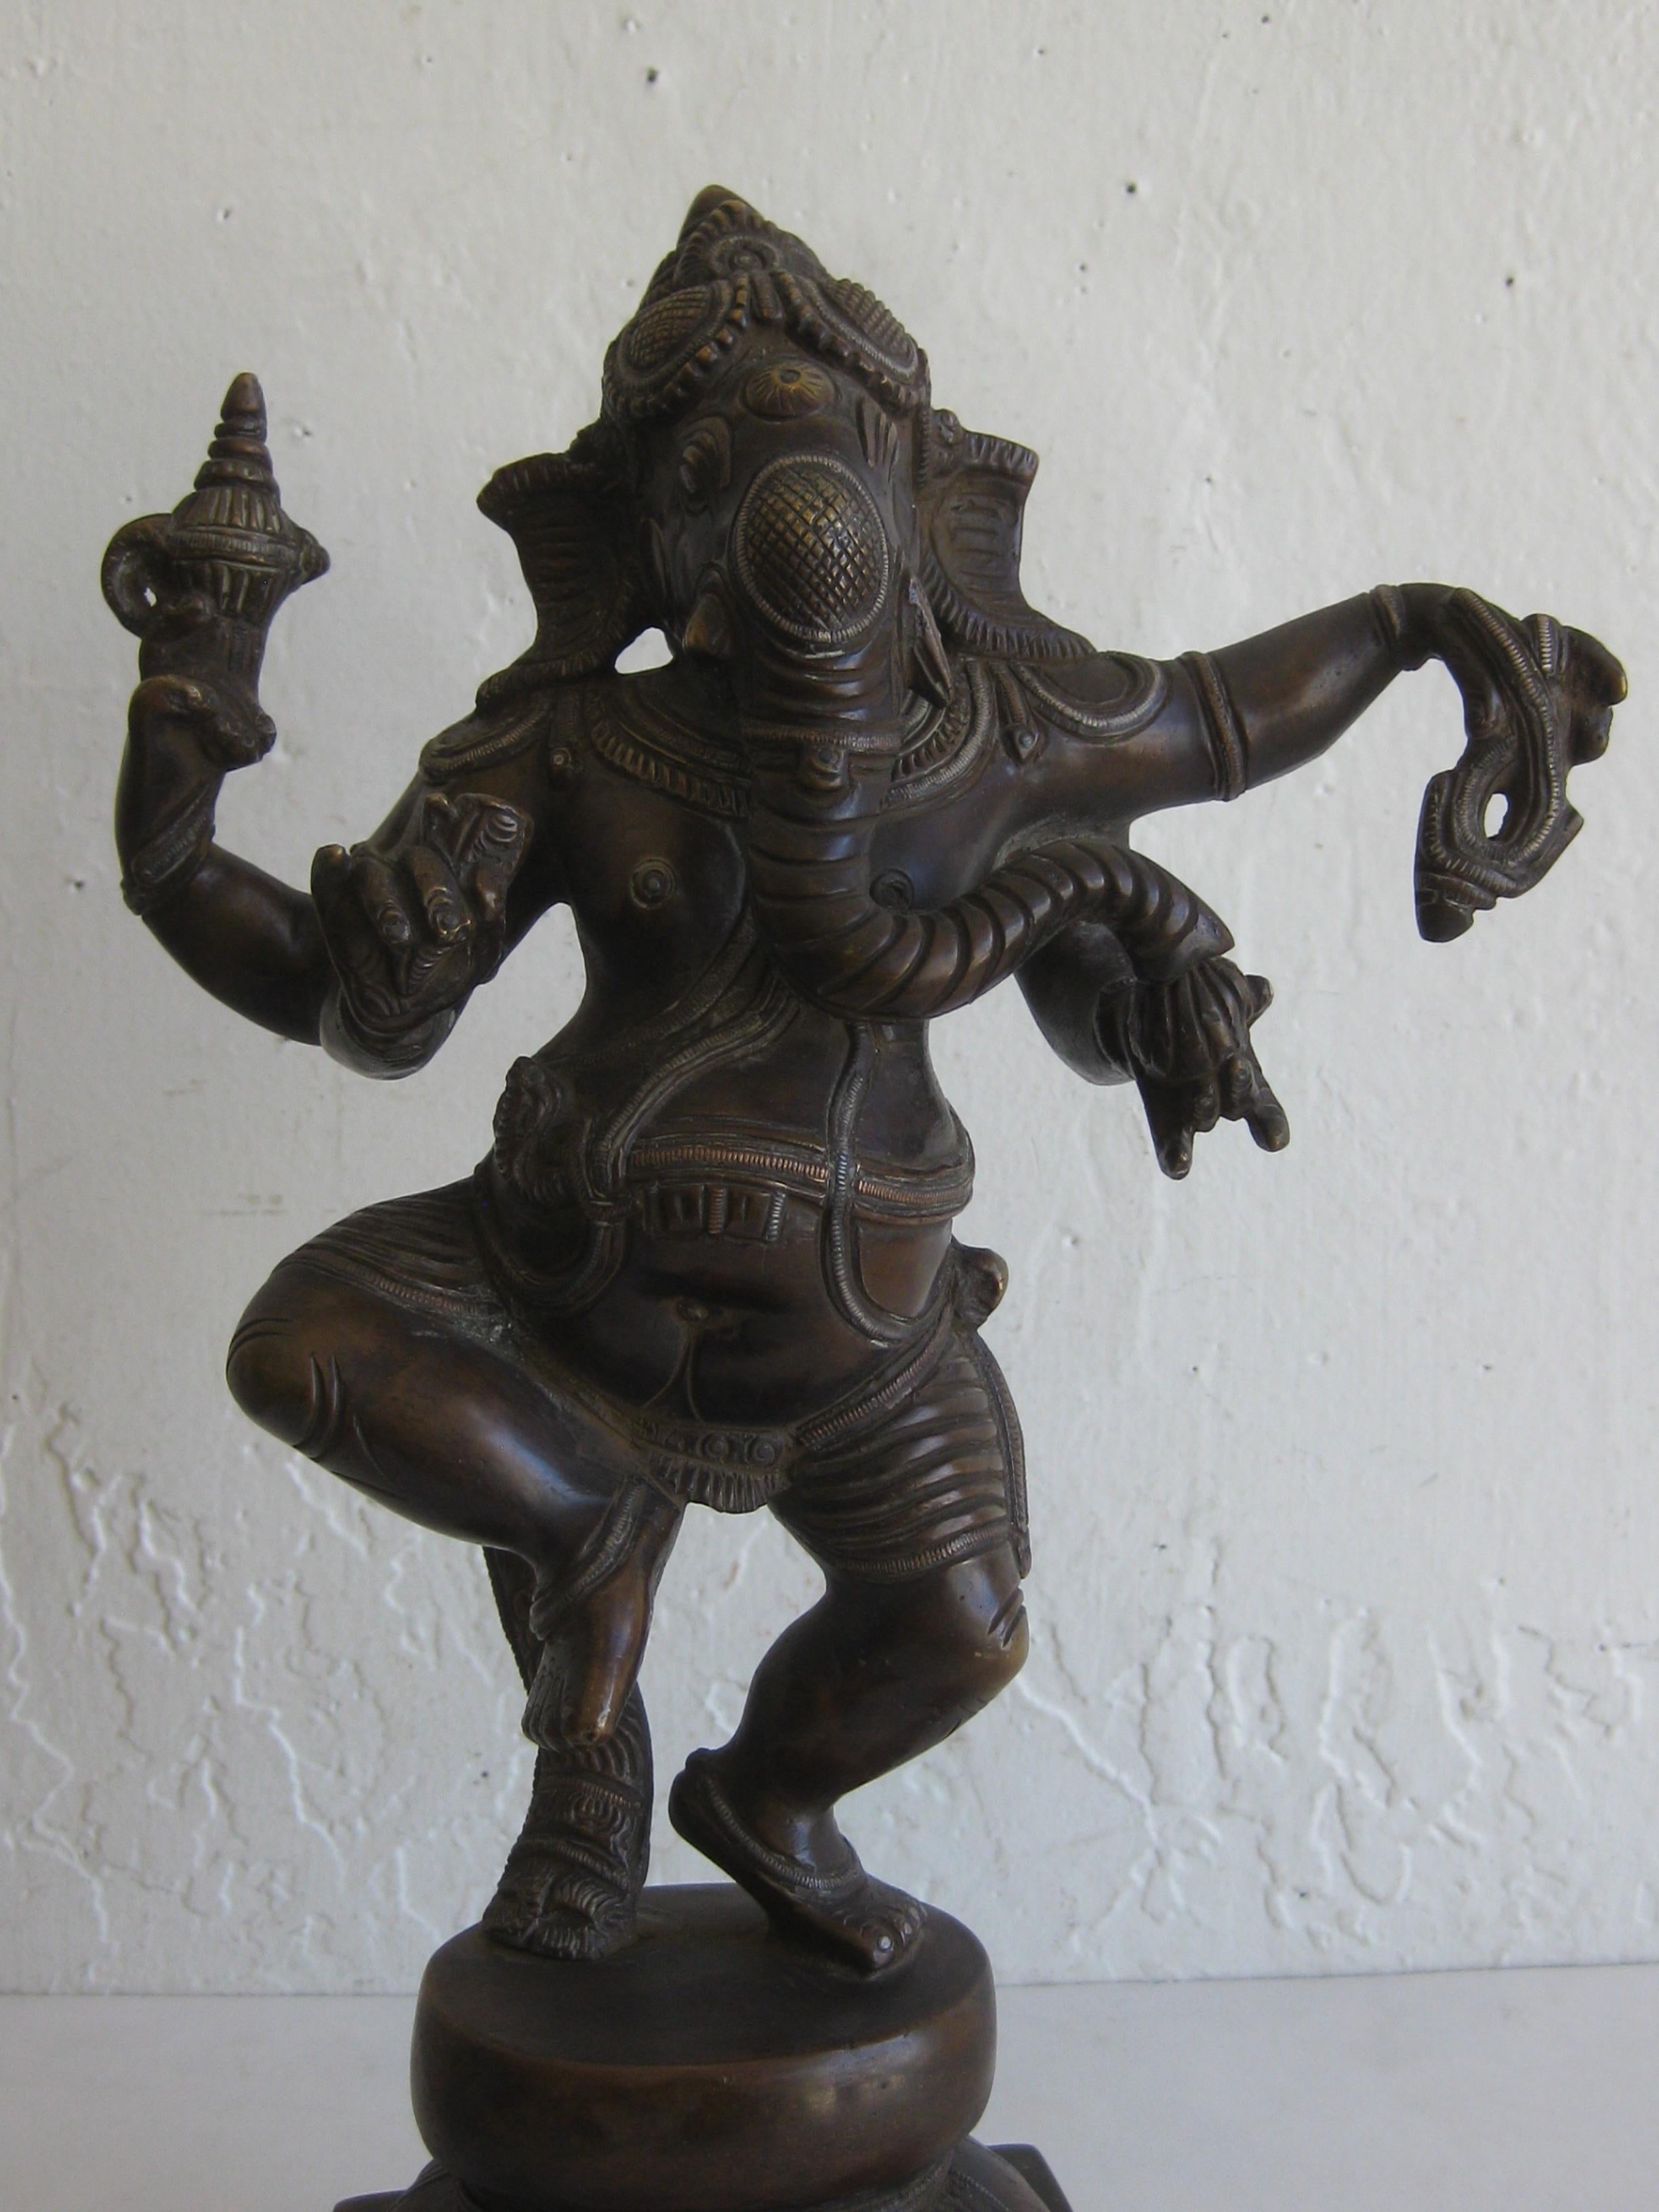 Fantastic antique Indian dancing four arm Lord Ganesha deity bronze statue sculpture. Very high quality bronze with awesome details. The bronze has a wonderful dark patina. In excellent original condition for its age. Measures 12 1/2